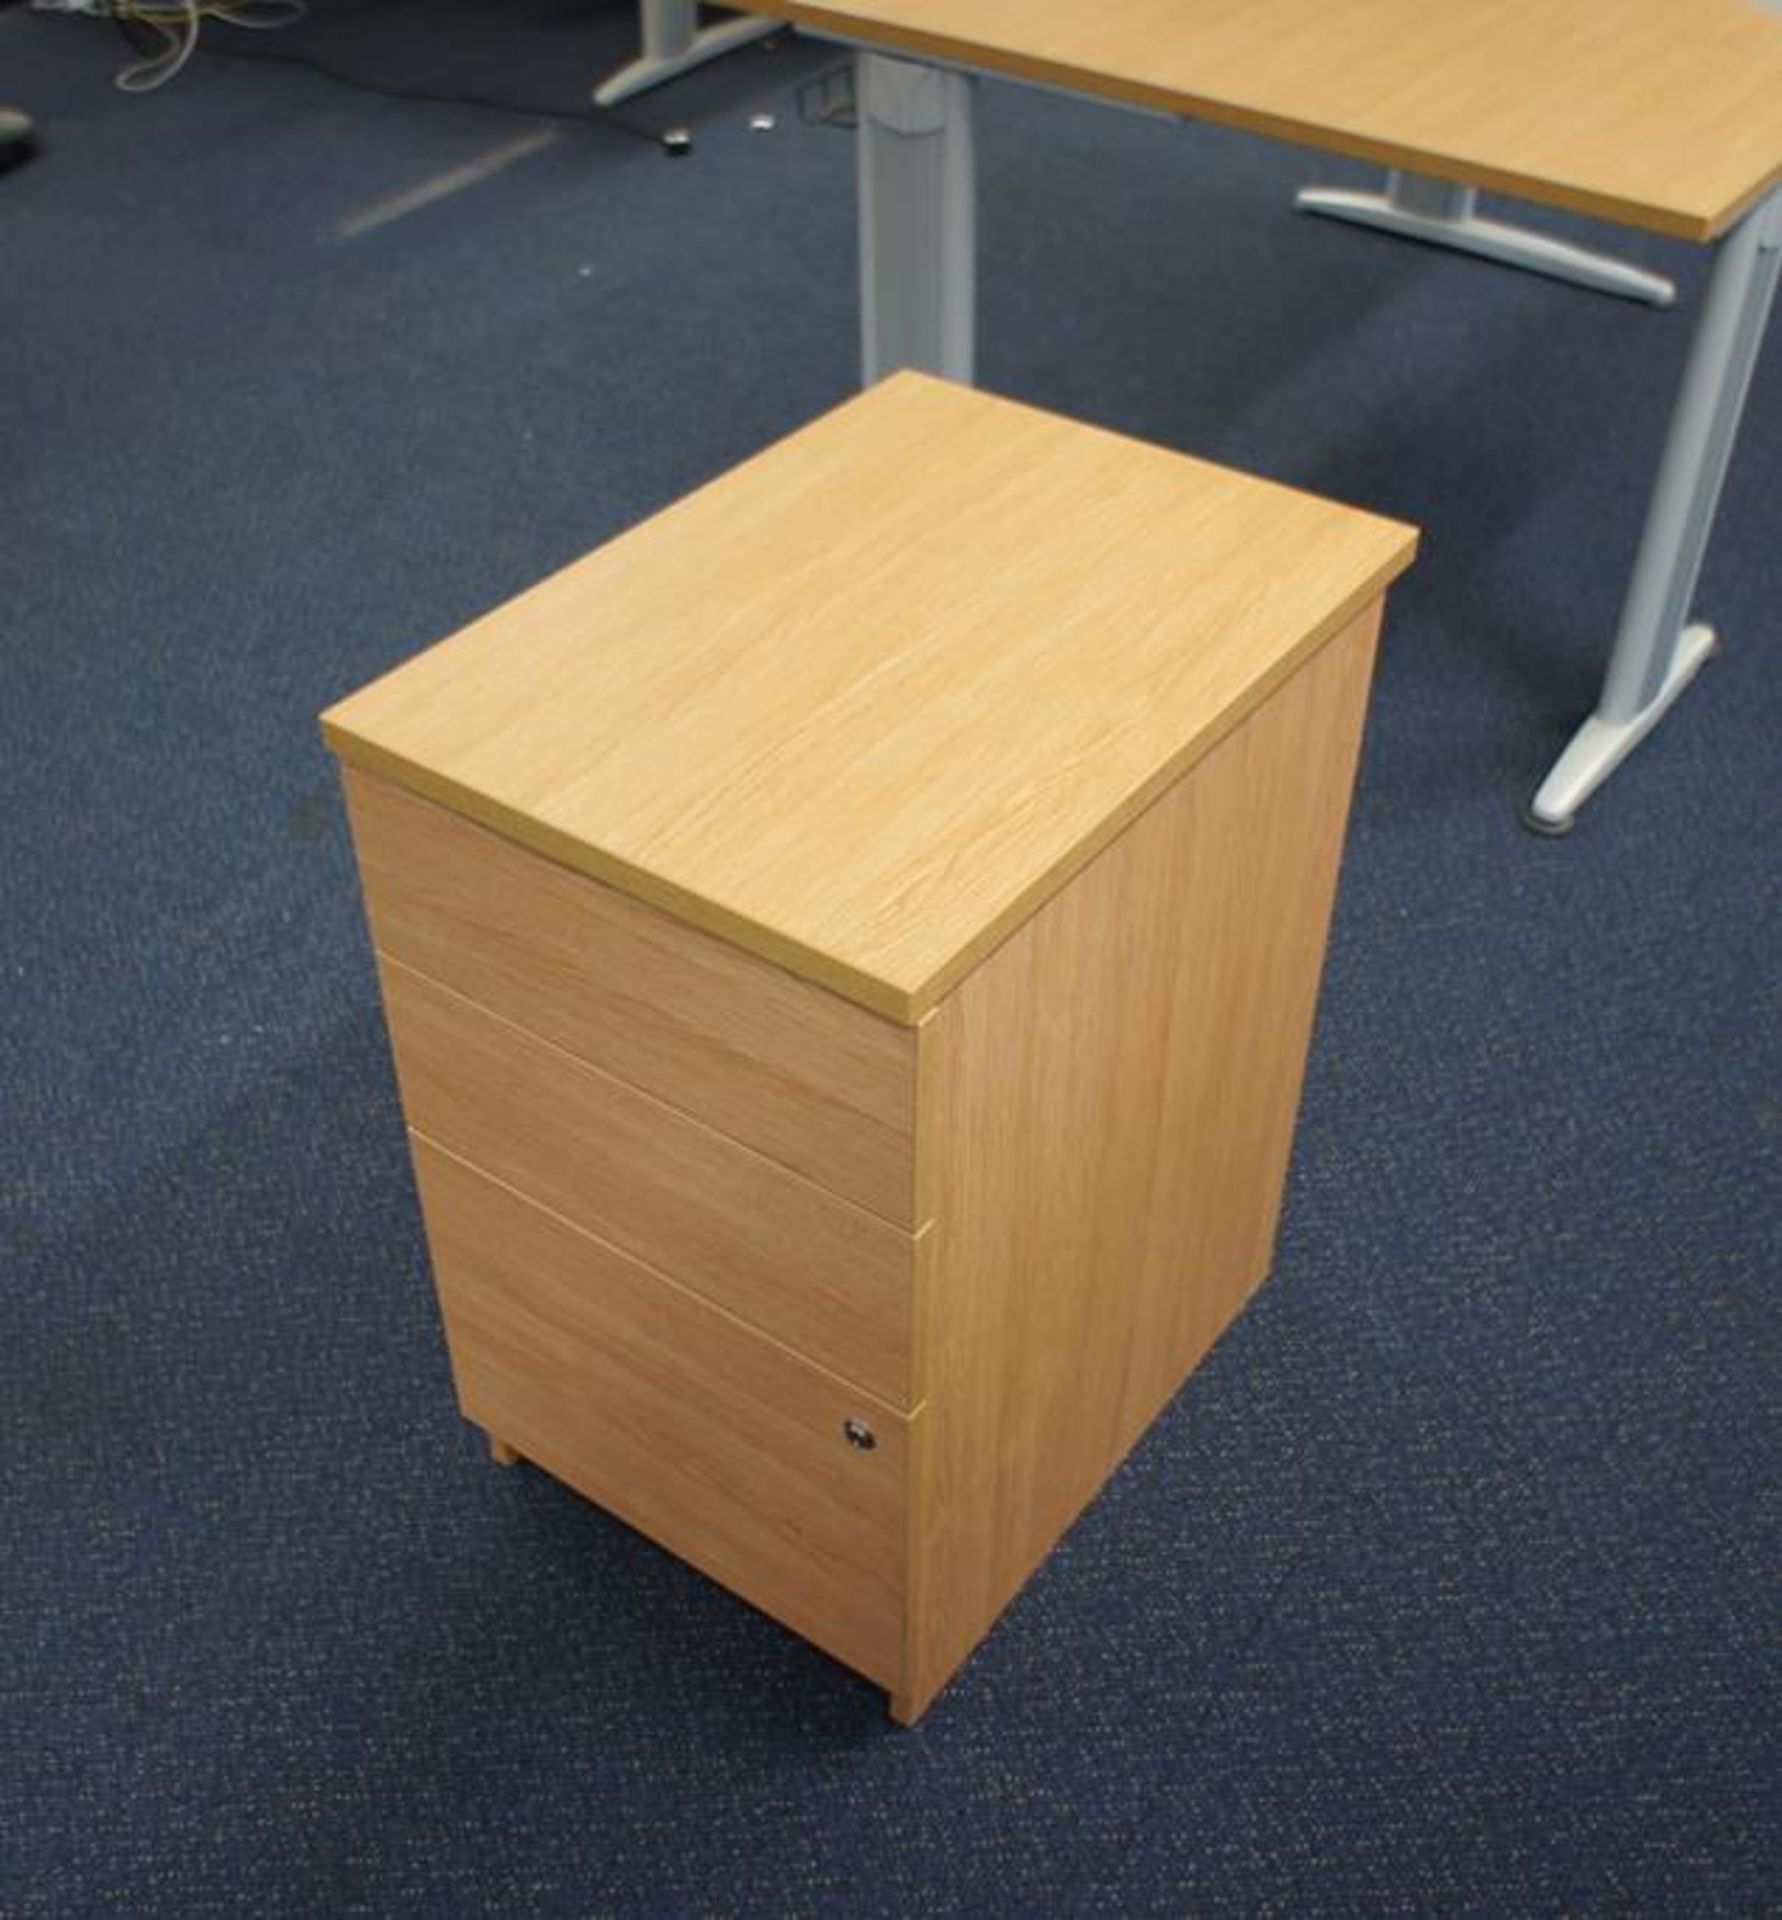 * Oak Effect Desk High Pedestal 800mm Deep Photographs are provided for example purposes only and do